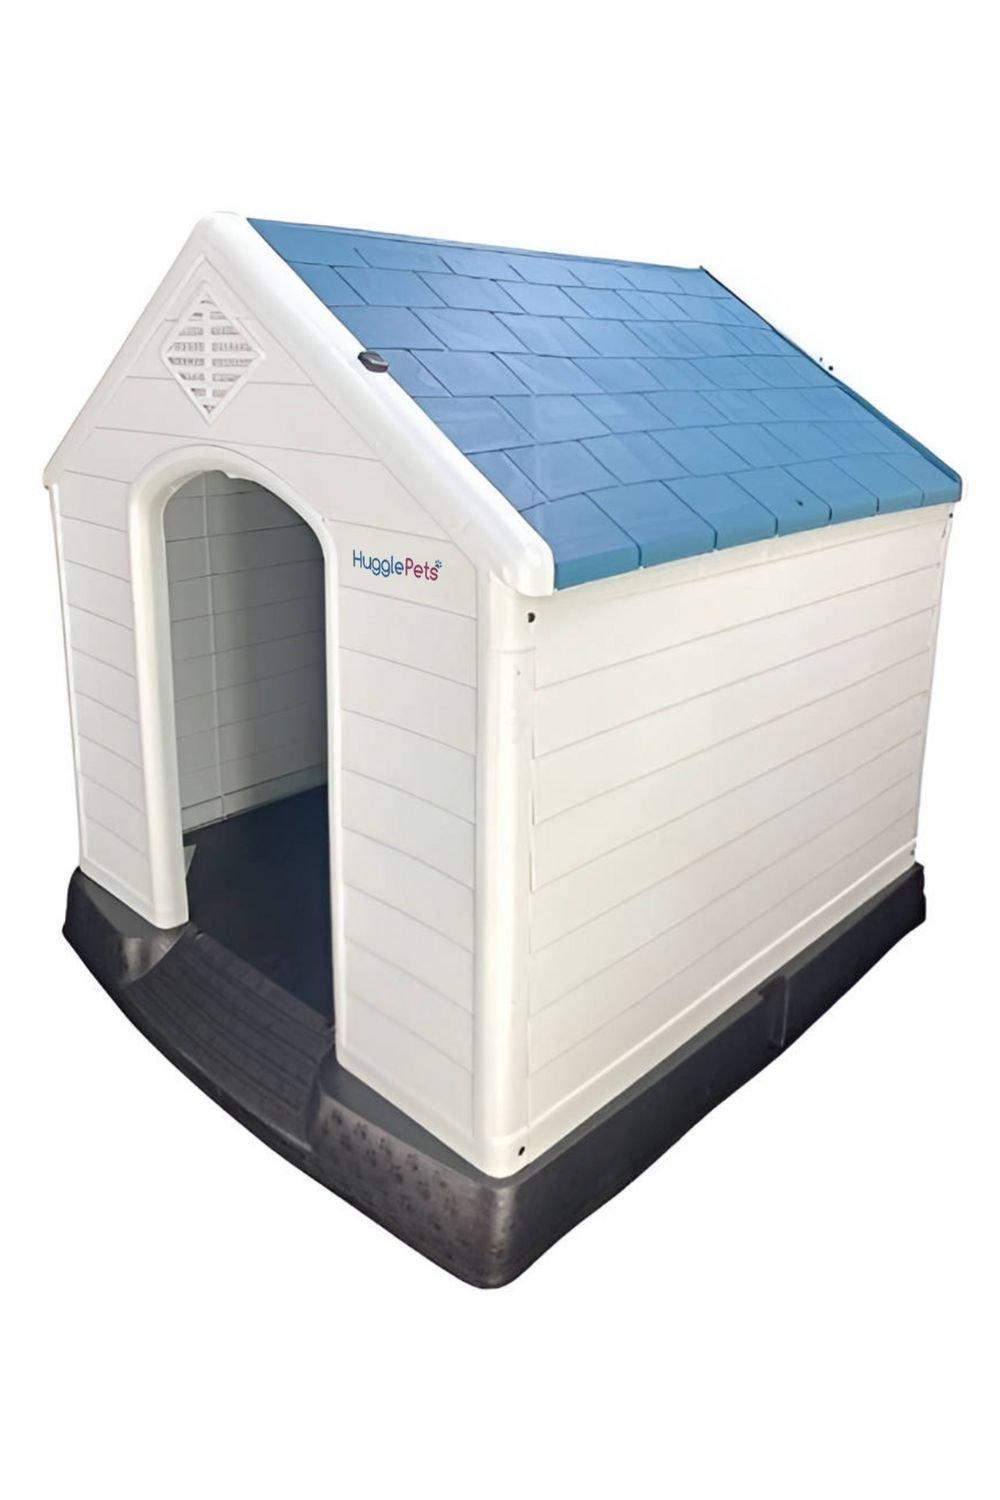 Plastic Dog Kennel with Base (413) - Blue Roof